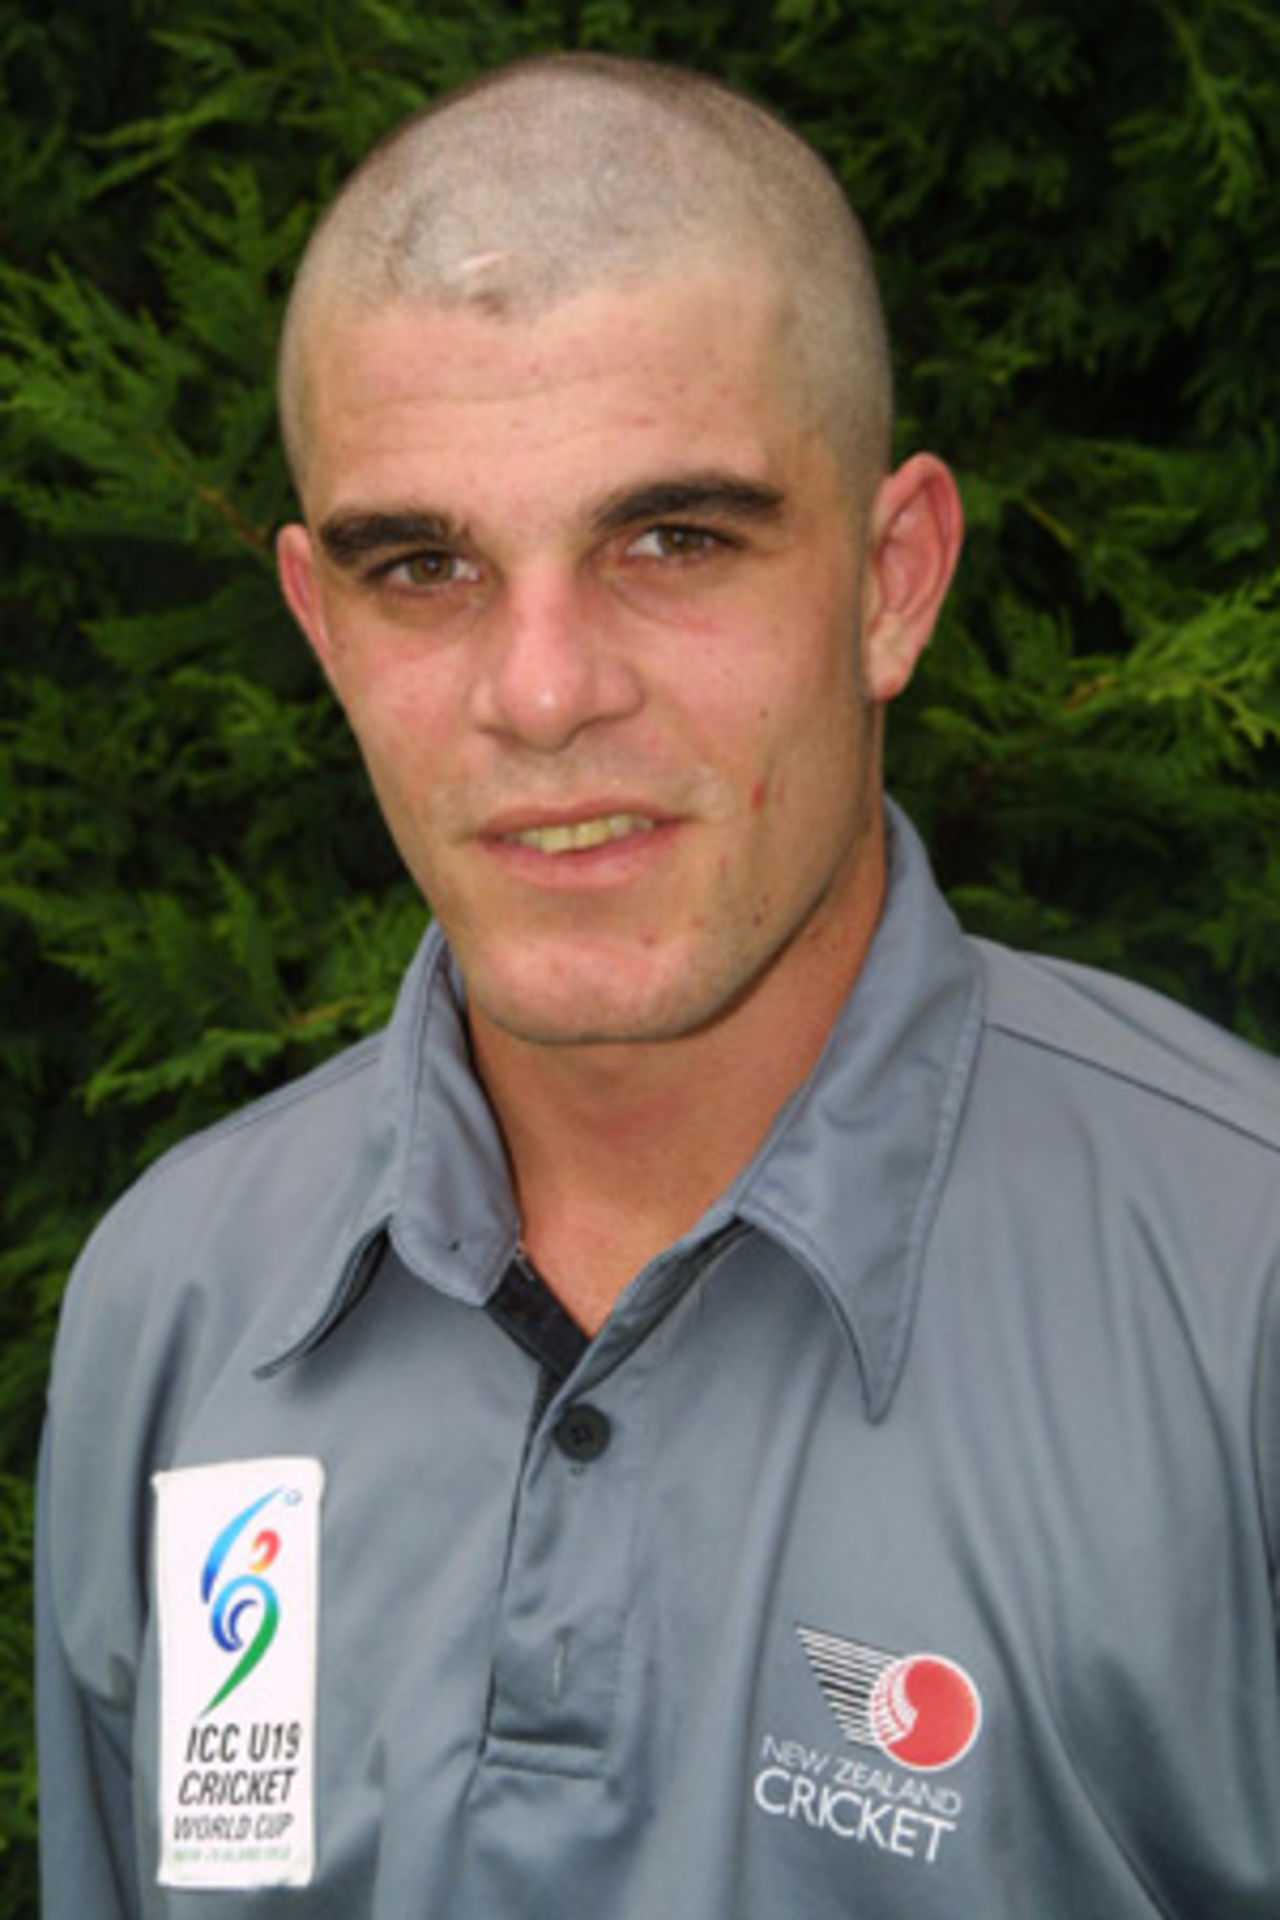 Portrait of Peter Borren, January 2002 - New Zealand Under-19 player for the ICC Under-19 World Cup 2002.